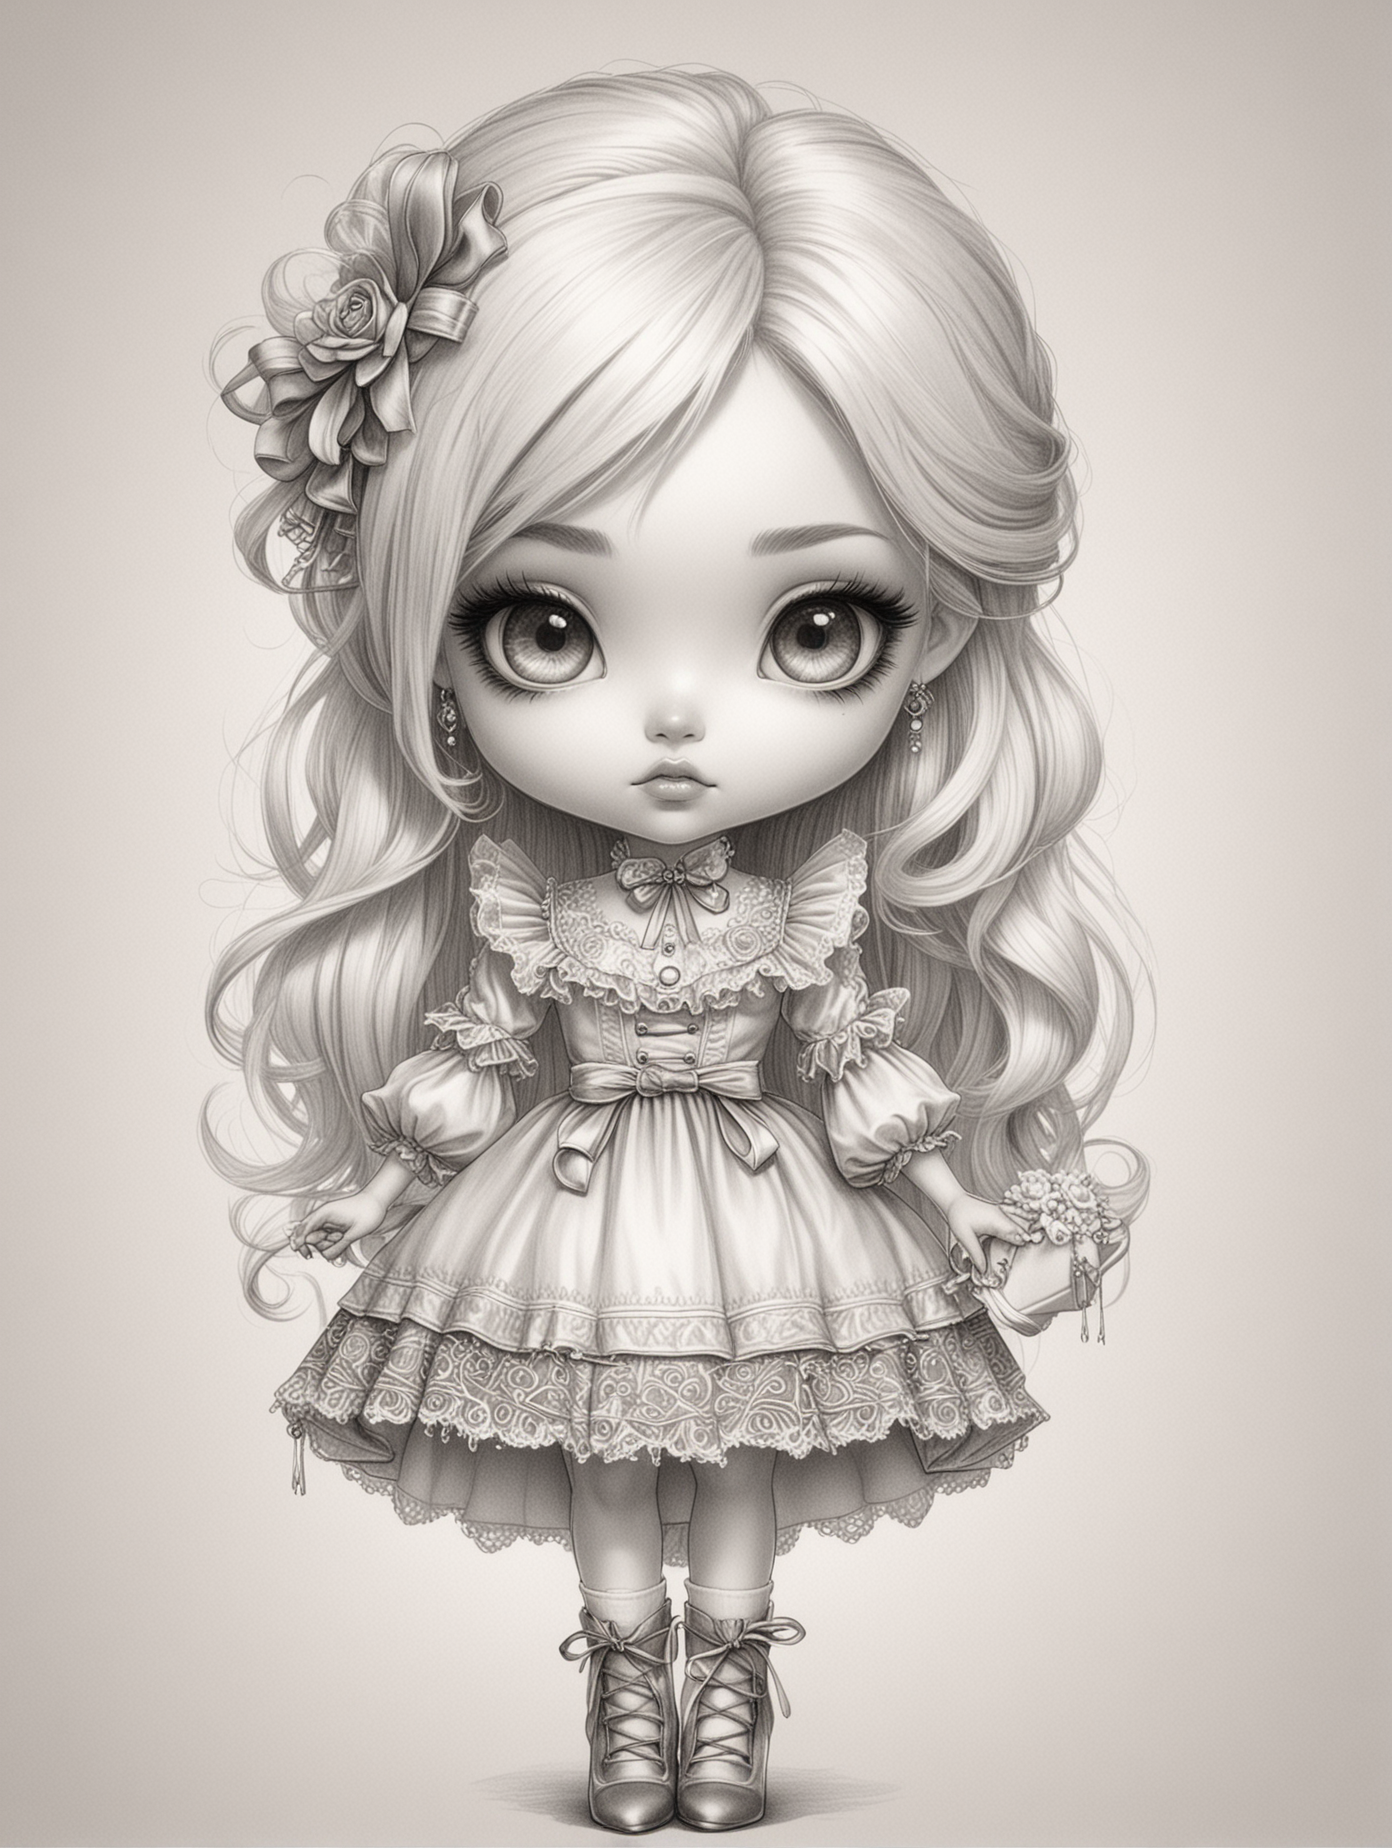 Chibi Style Realistic Sketch of Victorian Era Woman with White Hair